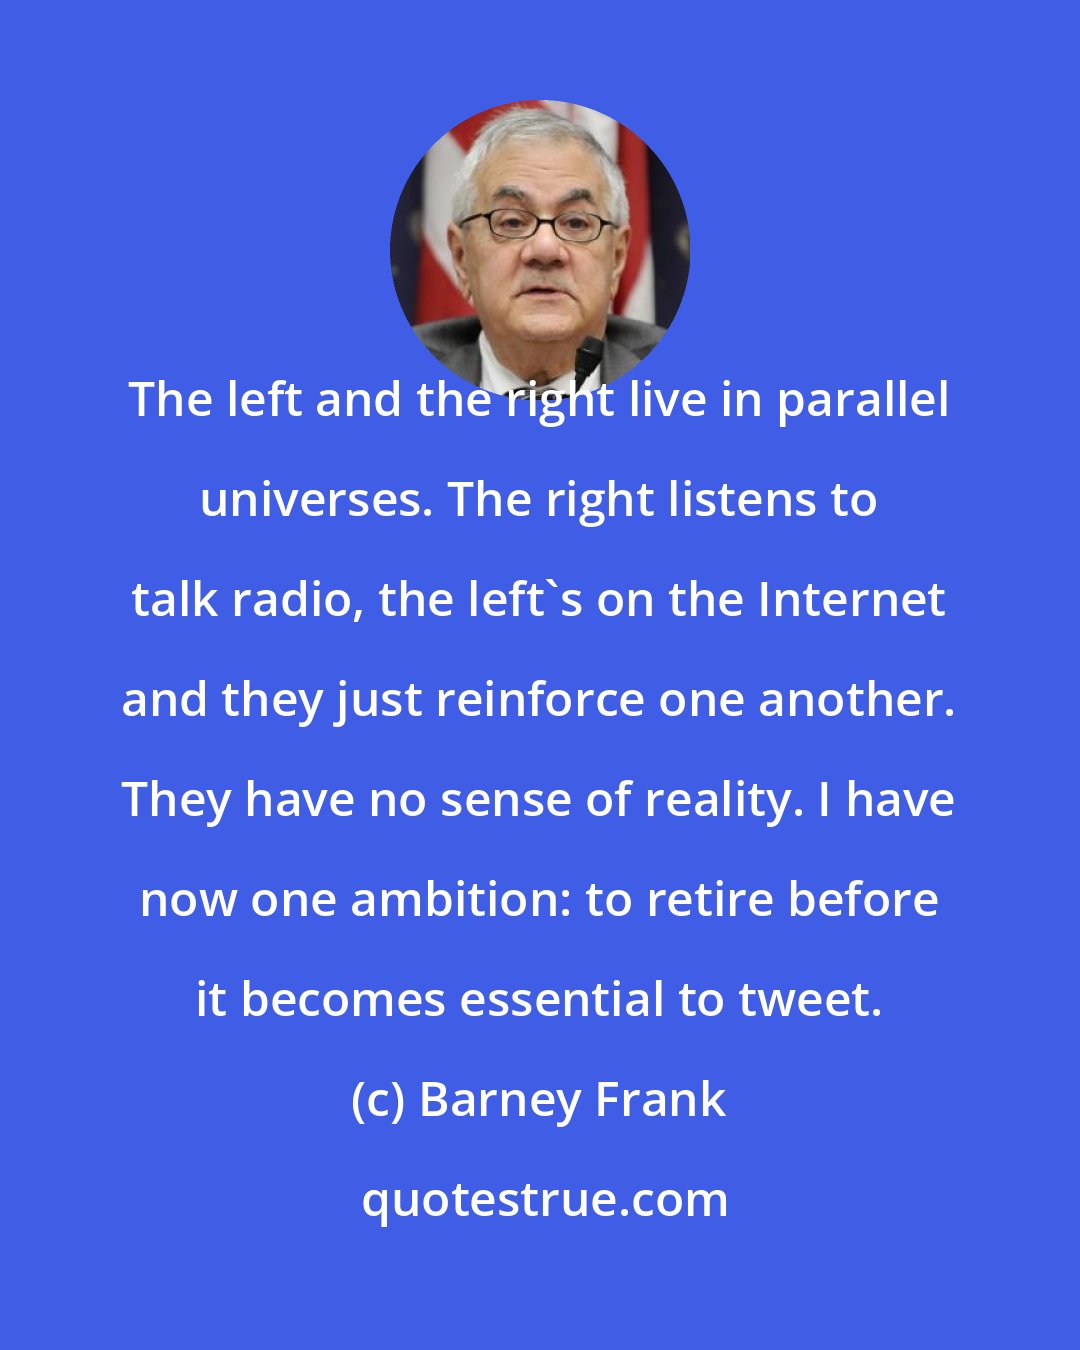 Barney Frank: The left and the right live in parallel universes. The right listens to talk radio, the left's on the Internet and they just reinforce one another. They have no sense of reality. I have now one ambition: to retire before it becomes essential to tweet.